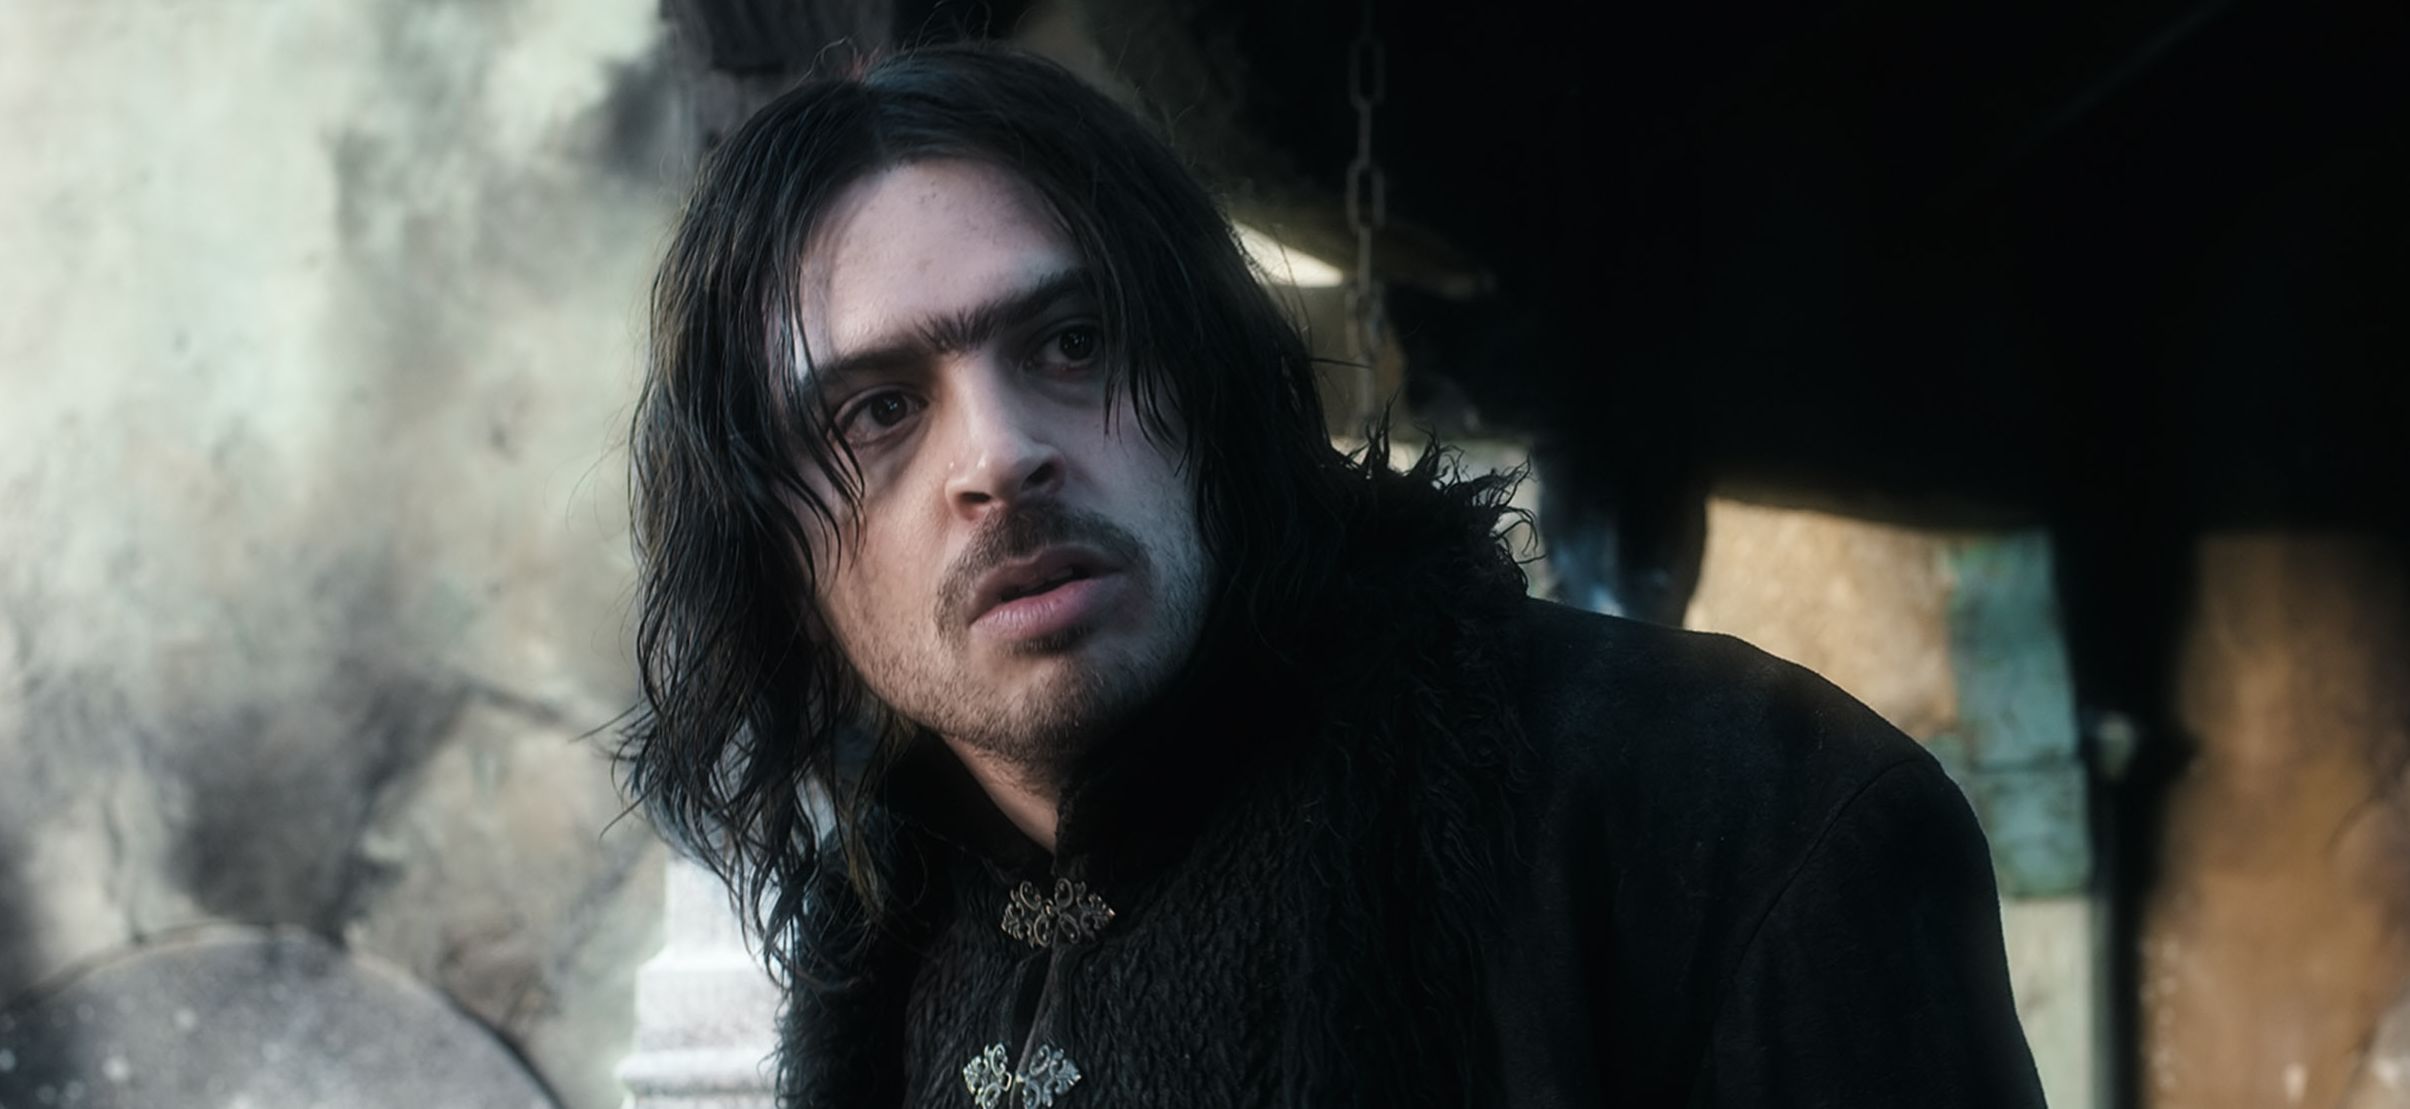 Unibrow guy in The Battle of the Five Armies